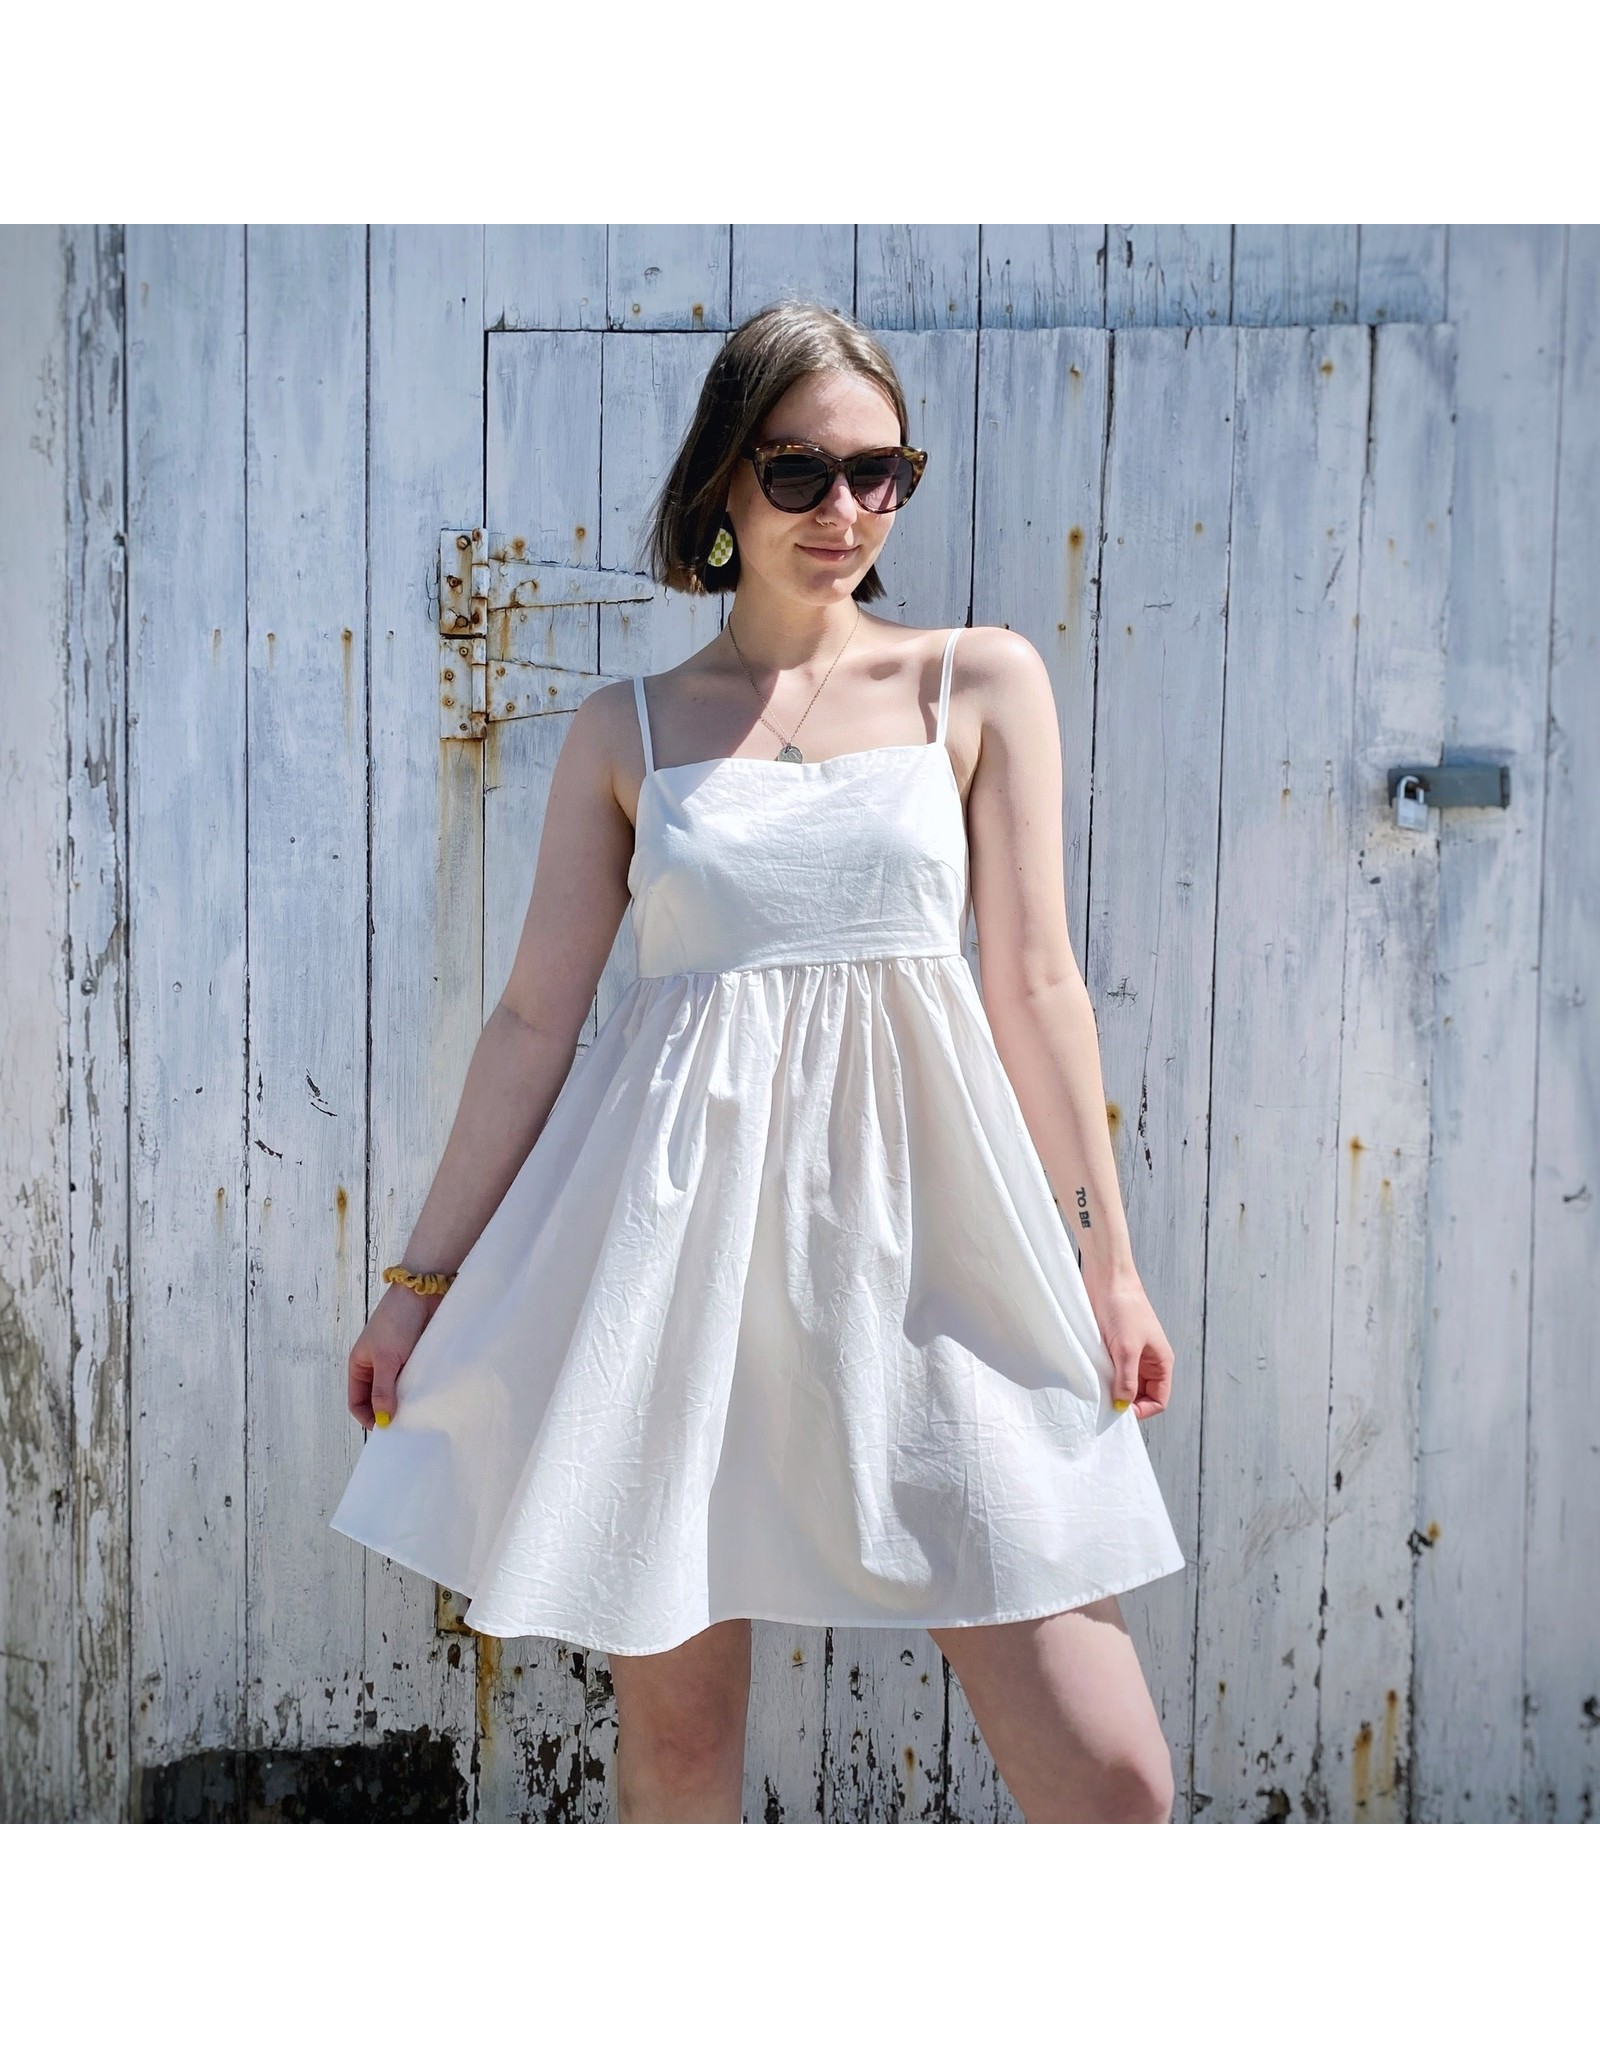 Biscuit Label - Folly Beach Sundress / White